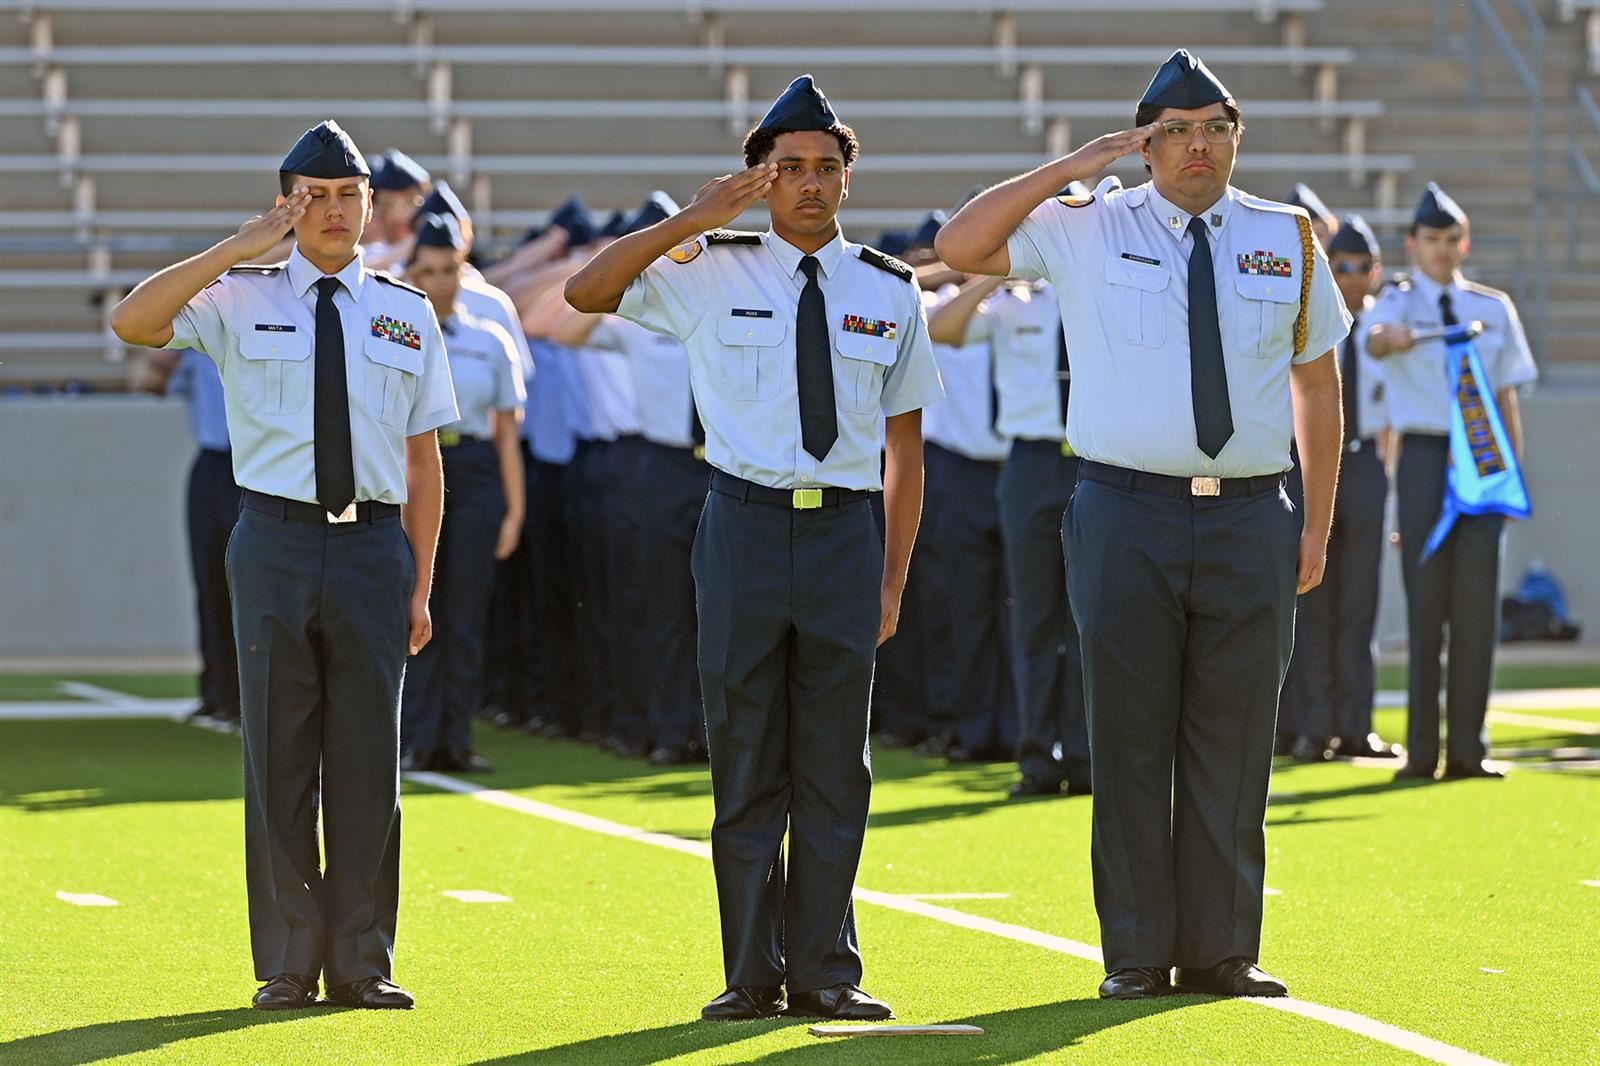 Jersey Village AFJROTC Unit TX-20017 joined units from Cy Falls and Cy Woods to earn the Outstanding Organization Award.